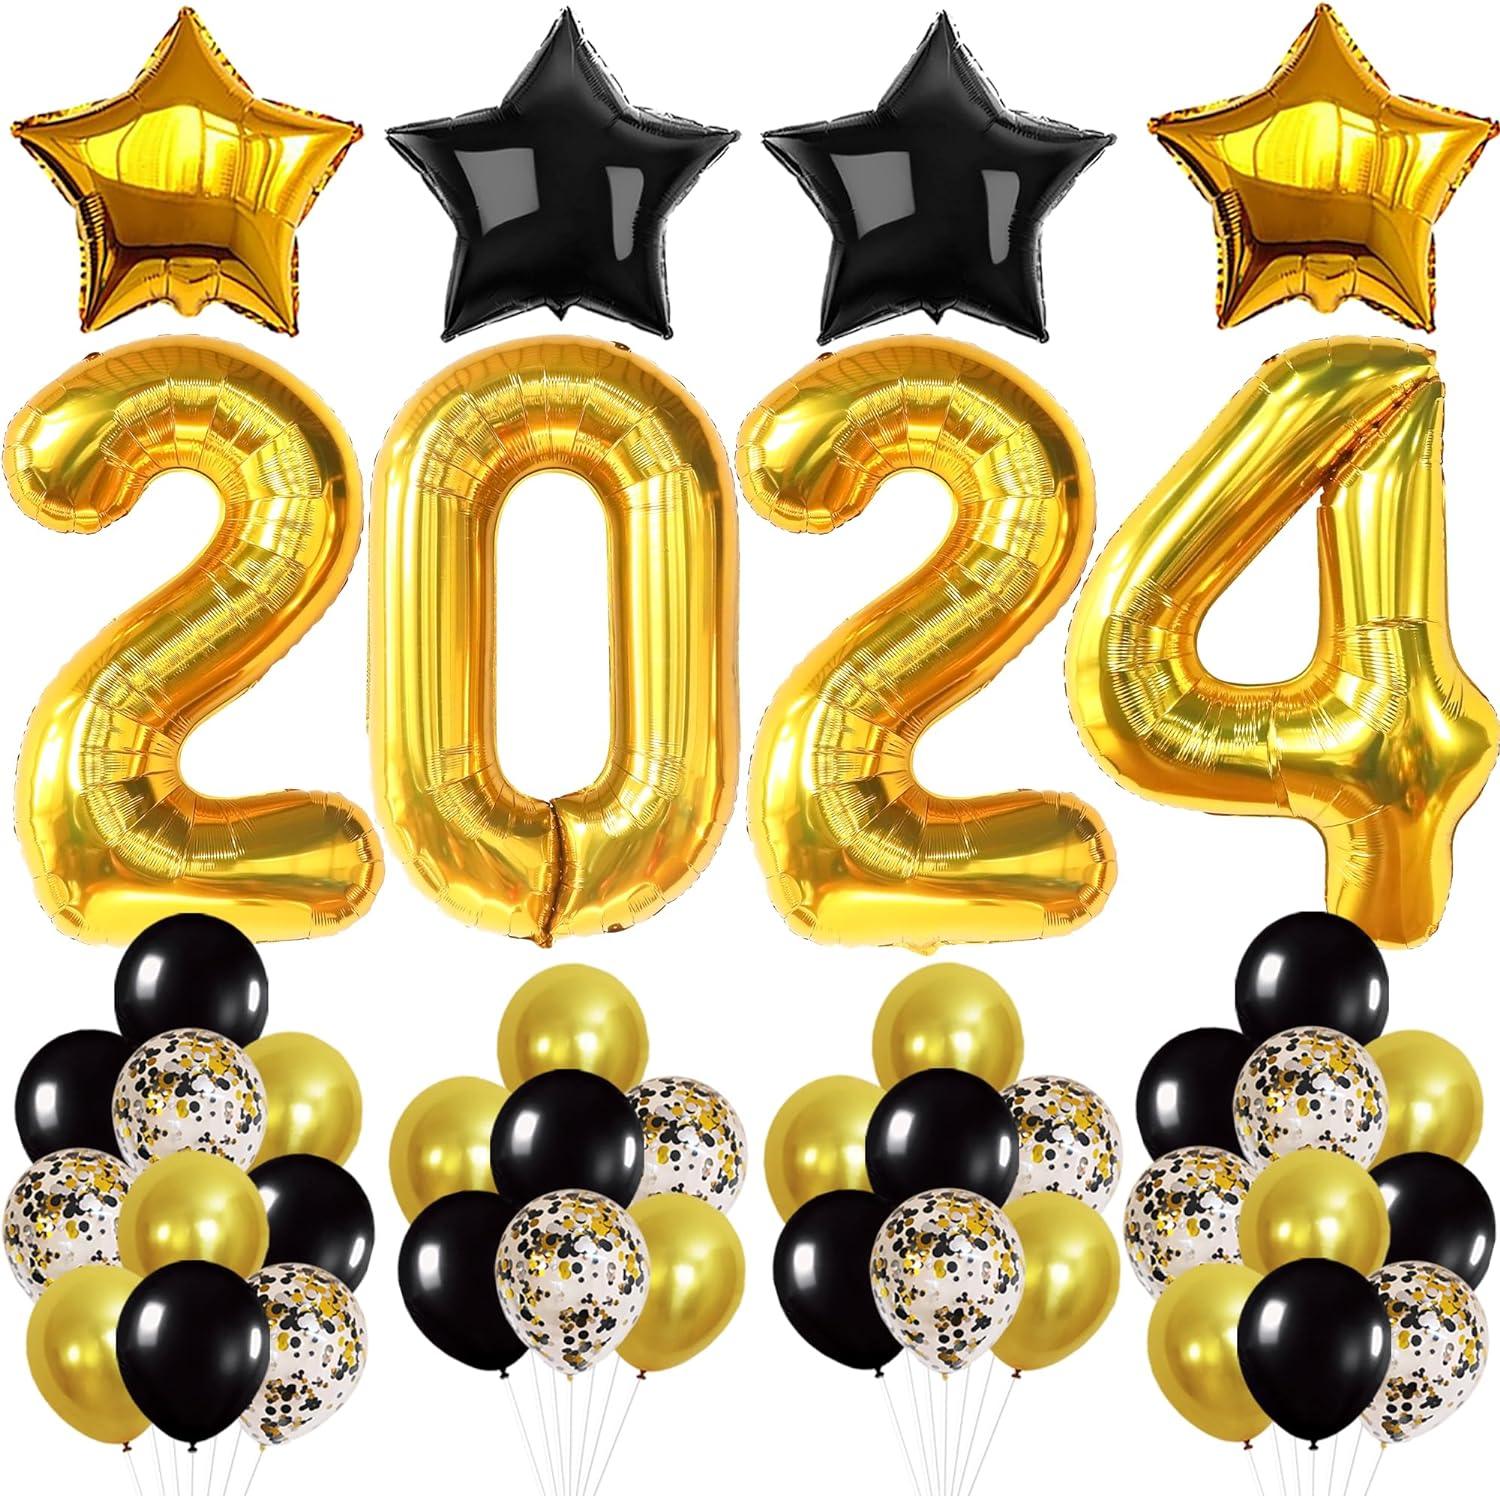 Happy New Year 2024 Balloons Gold Number Balloons For New Years